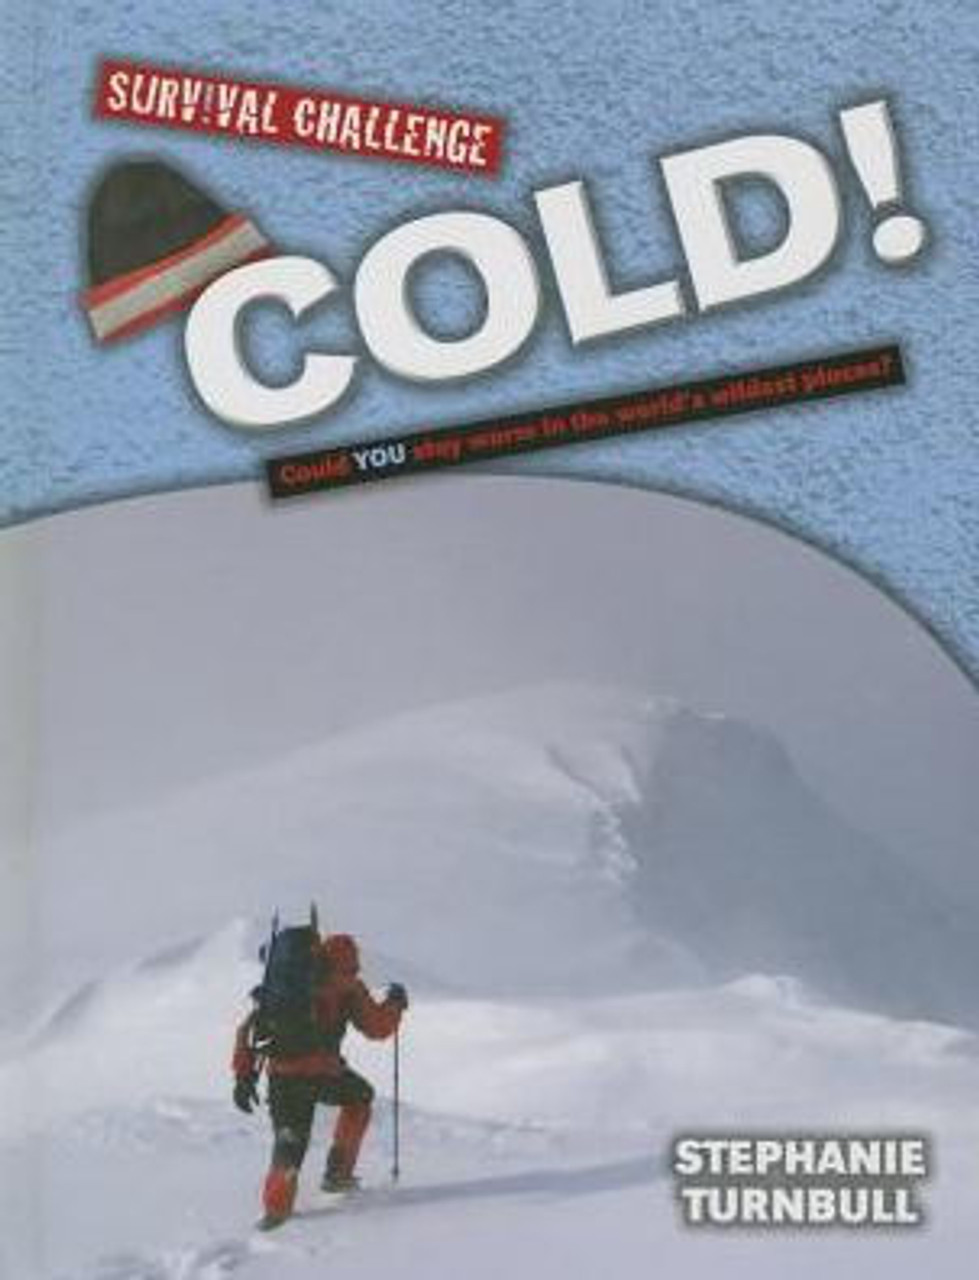 Cold! (Paperback) by Stephanie Turnbull